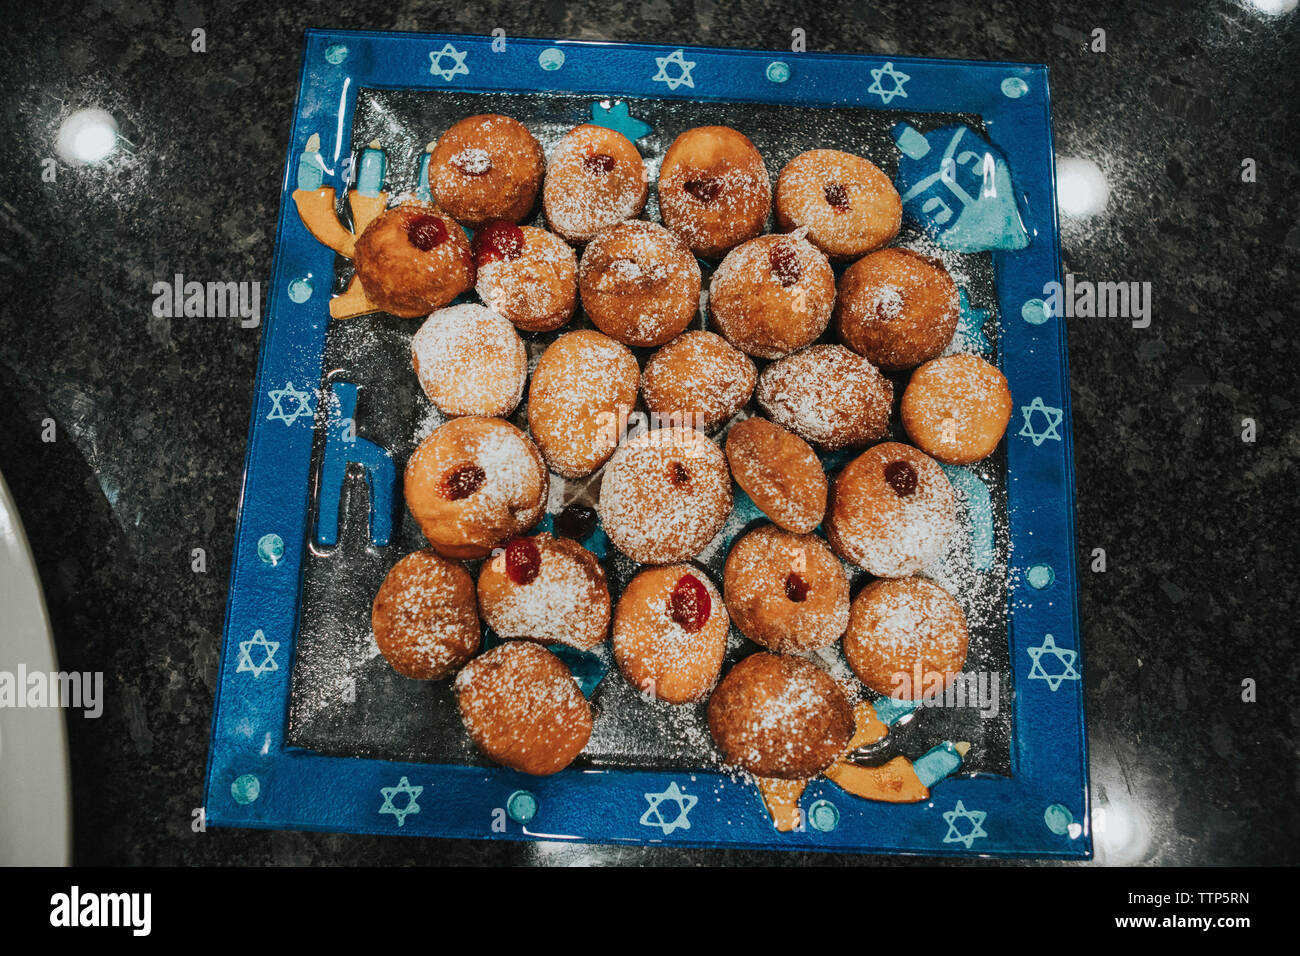 High angle view of sweet food on table Banque D'Images